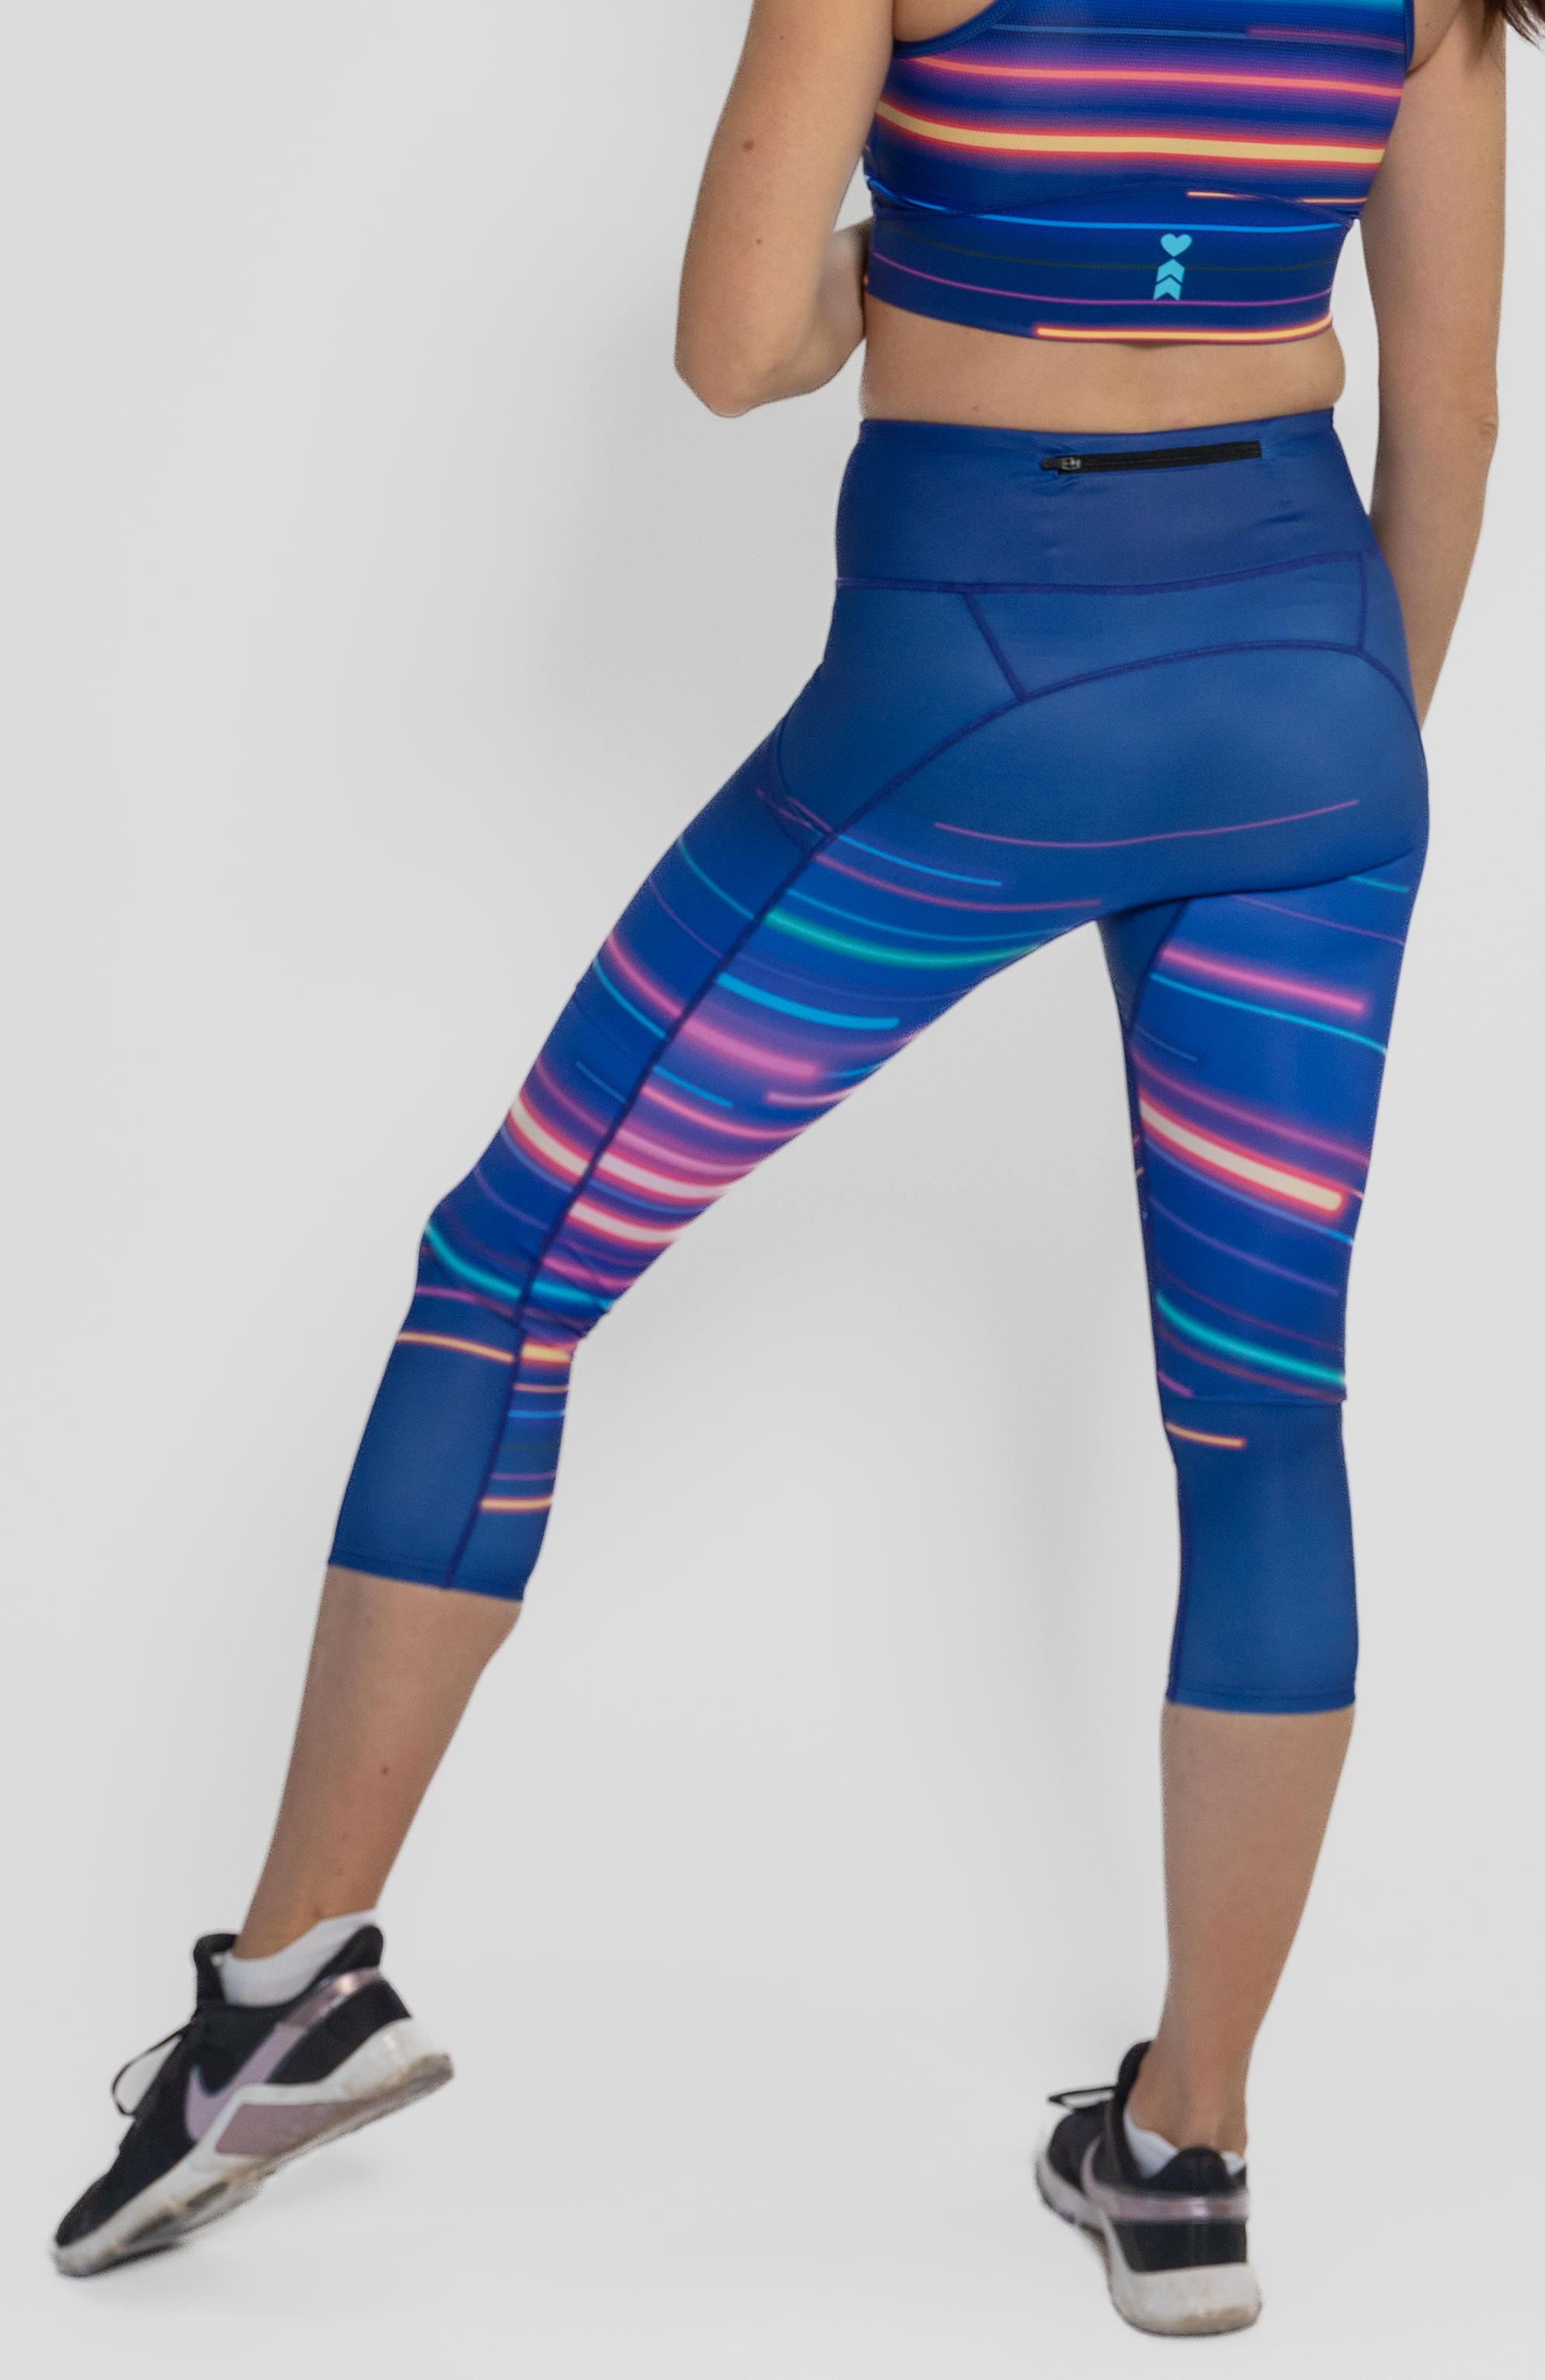 Coeur Sports Run Tights PRESALE! Collective Beat 24 Performance 7/8 Tights